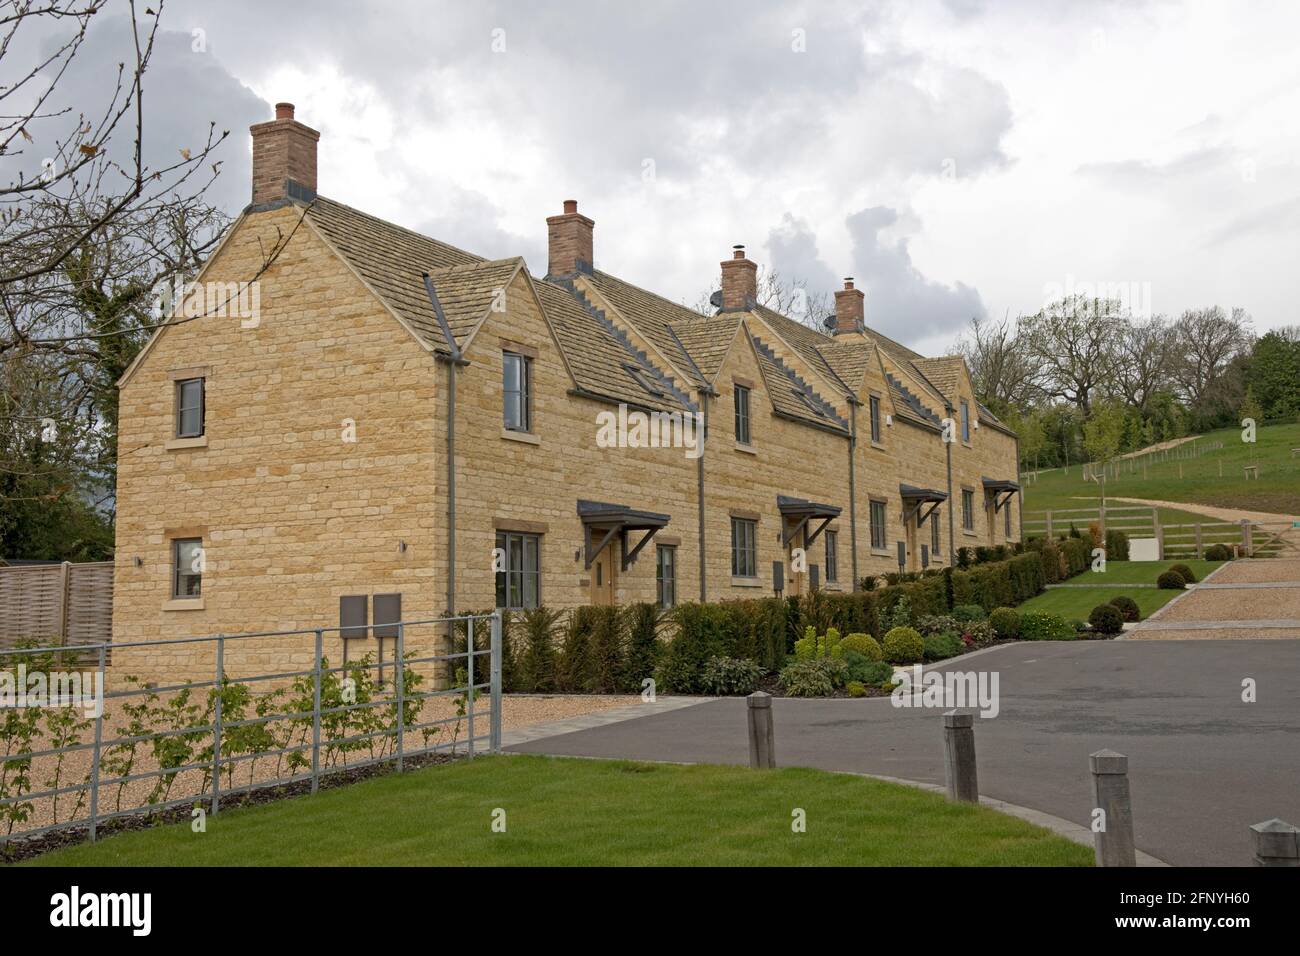 Attractive linked modern Cotswood stone houses Chipping Campden UK Stock Photo